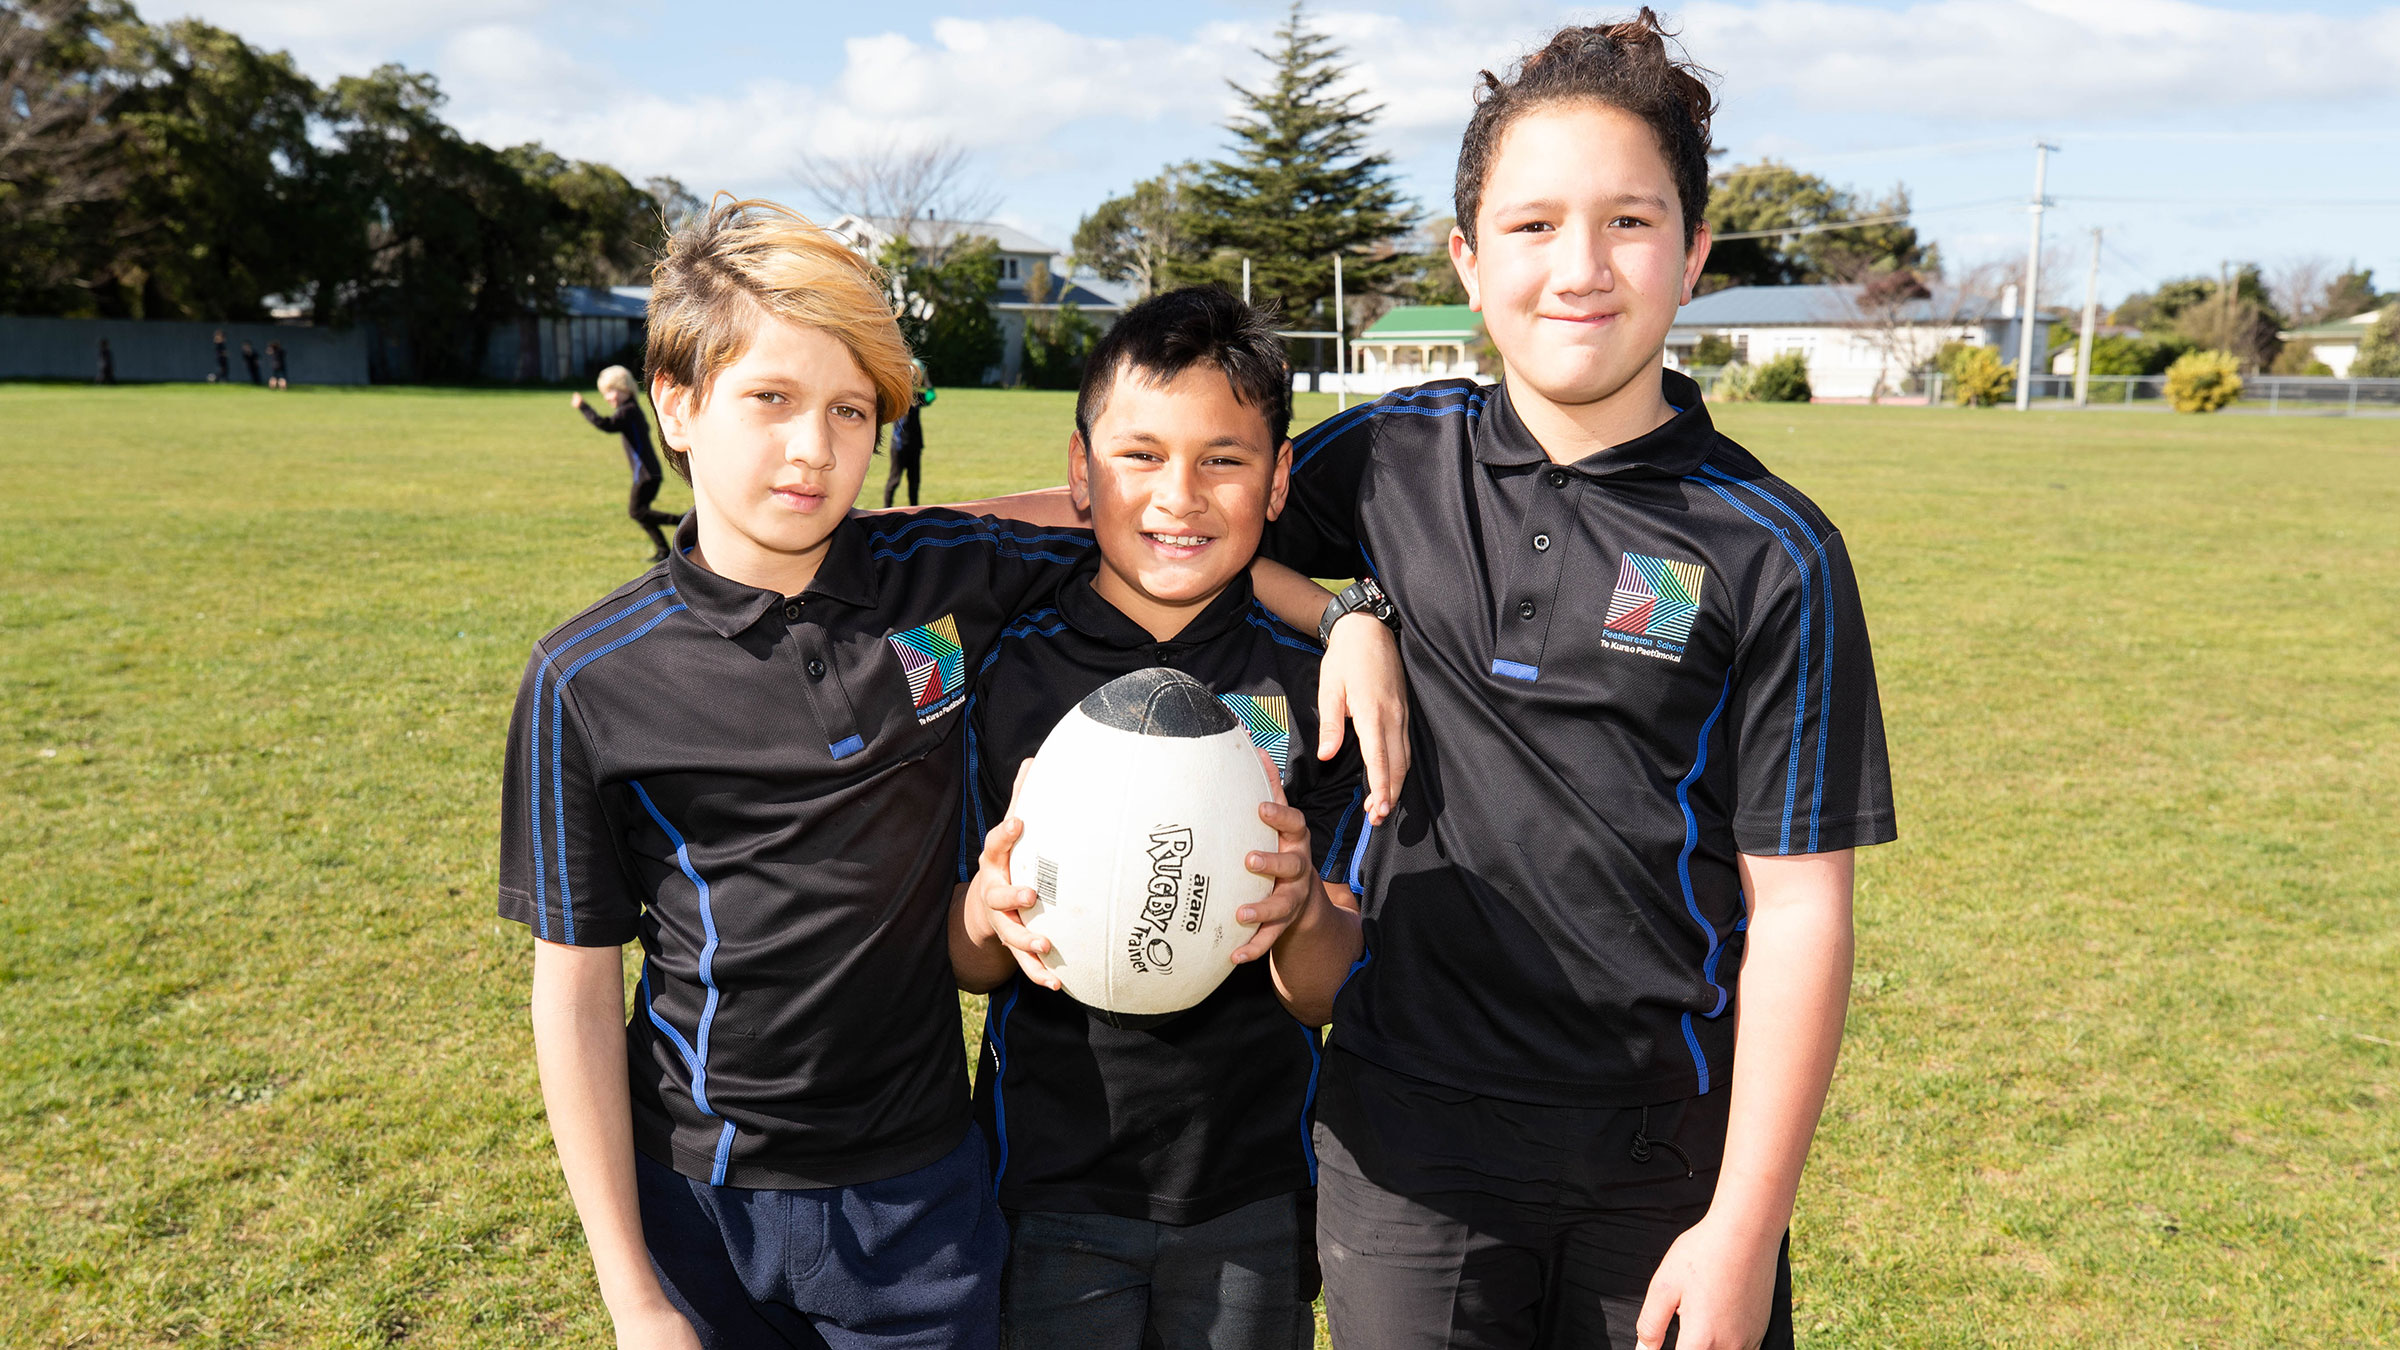 Three students in sport uniforms posing with a rugby ball and smiling